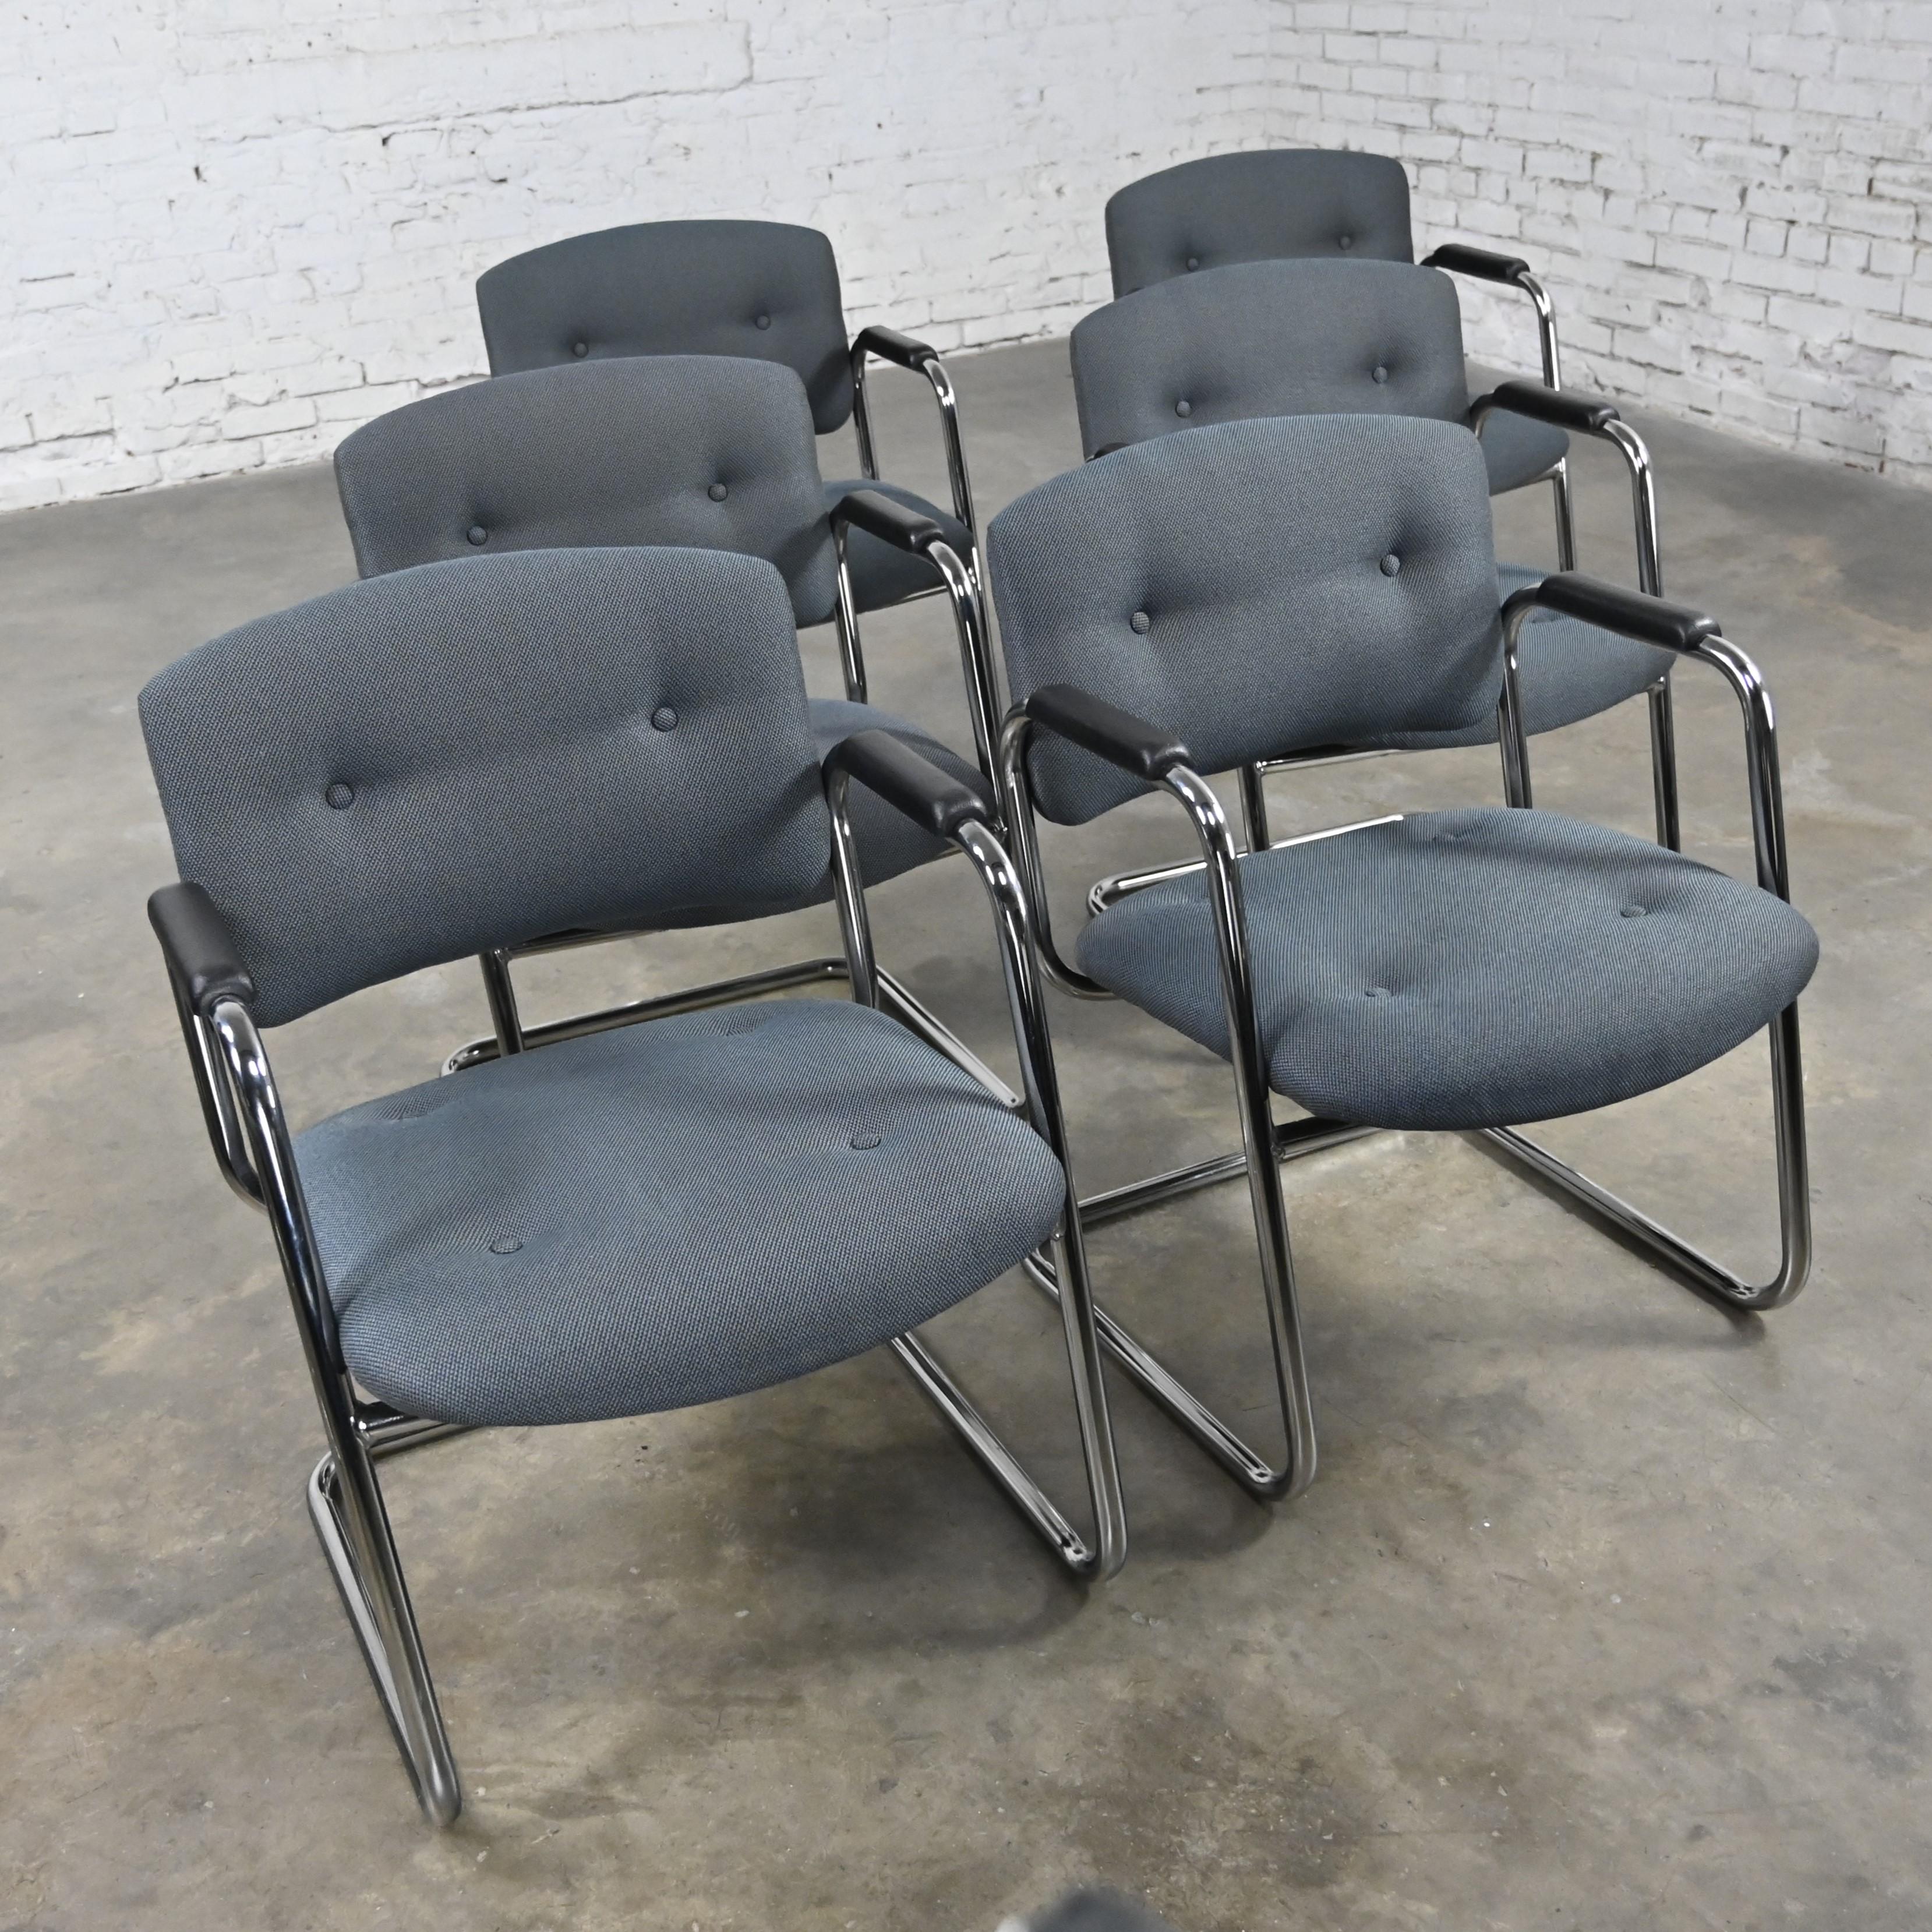 Awesome gray & chrome vintage cantilever chairs by United Chair Company in the style of Steelcase, set of 6. Comprised of a chrome cantilever frame, black plastic armrests, and their original gray tweed fabric with button details. This listing is